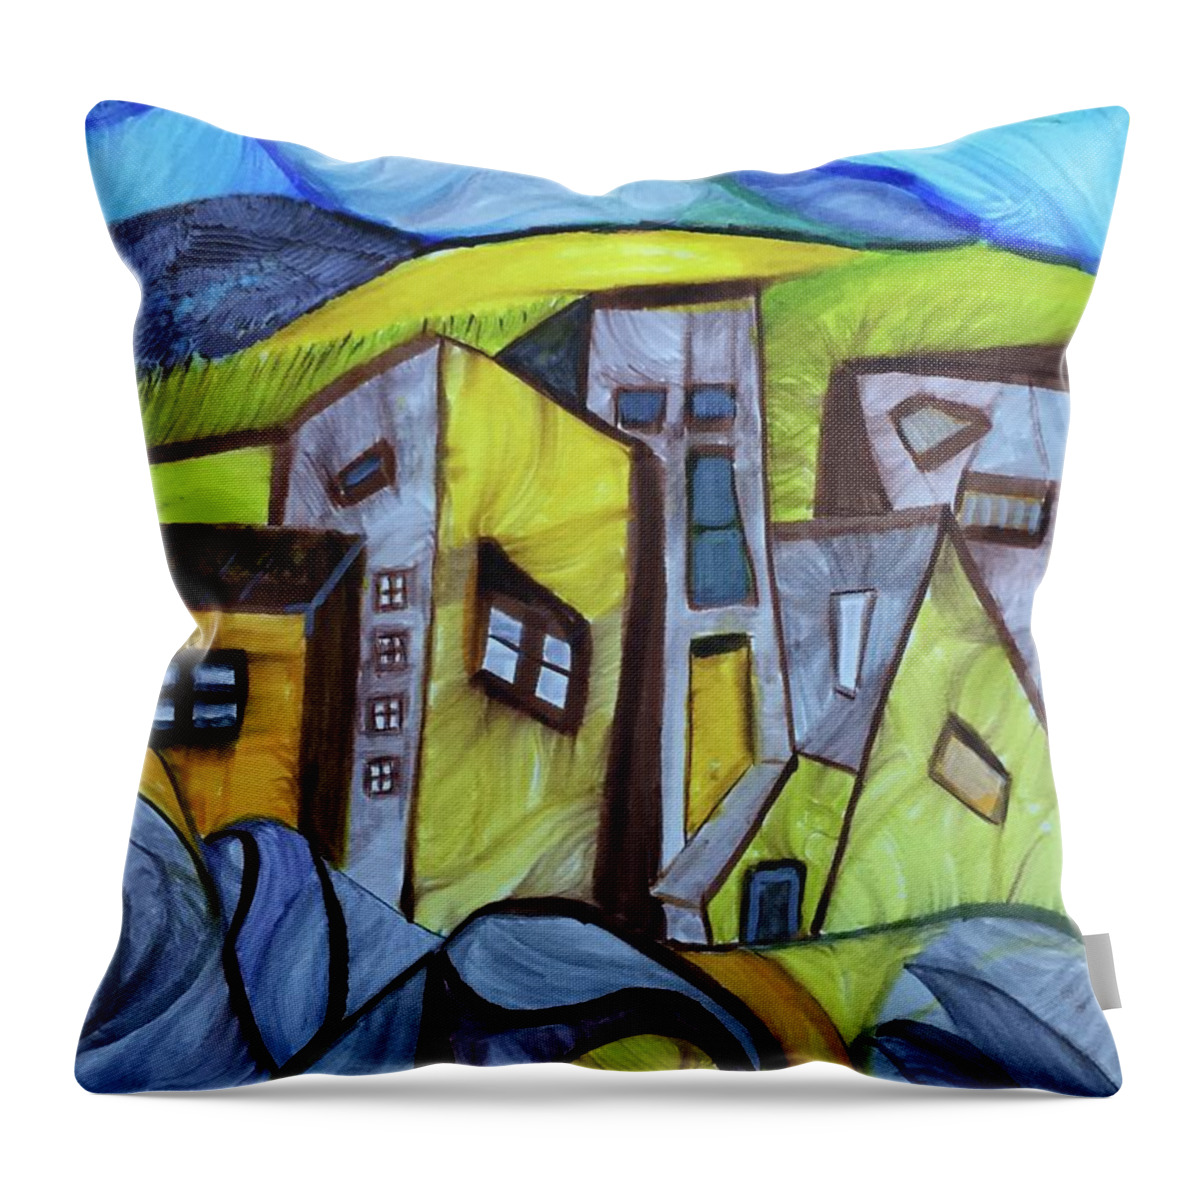 Pen Throw Pillow featuring the drawing Imaginary Roadside Textures by Dennis Ellman